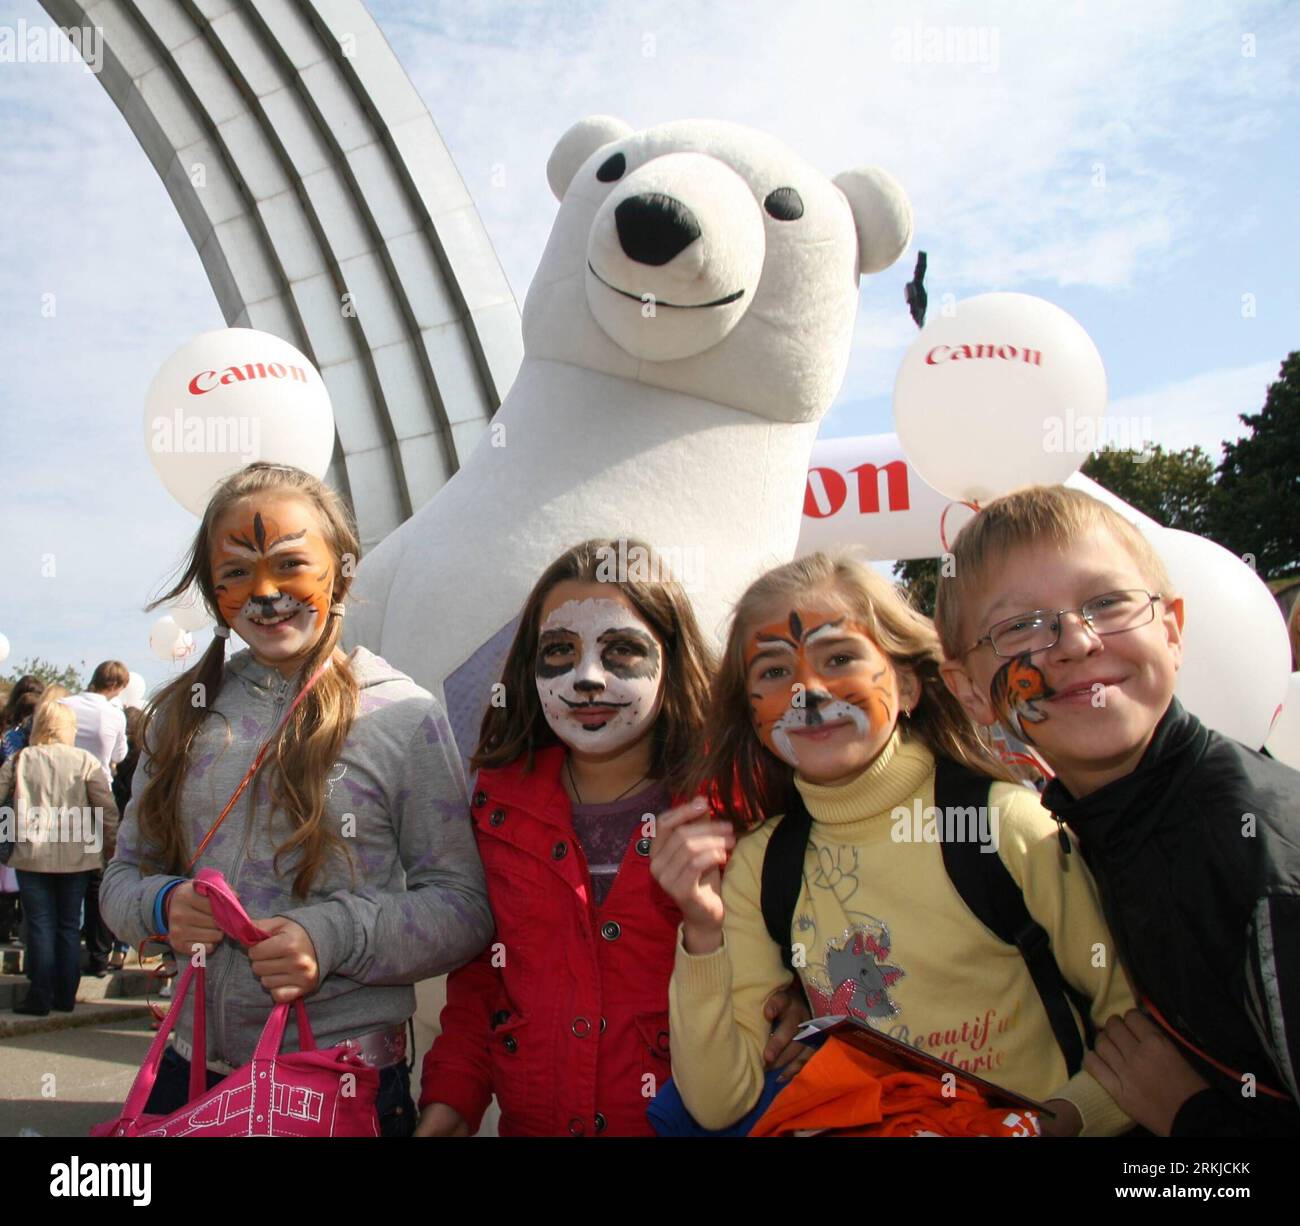 Bildnummer: 56101884  Datum: 24.09.2011  Copyright: imago/Xinhua (110925) -- KIEV, Sept. 25, 2011 (Xinhua) -- Teenagers wear animal facial makeups during the environmental campaign in Kiev, capital of Ukraine, Sept. 24, 2011. During Moving Planet , a one-day environmental campaign held in Kiev on Saturday, Ukrainian teachers, teenagers, atheletes and retirees joined various activities including marathon, swimming, dancing and kite-flying to call on a shift to cleaner energy from fossil fuel, a main source of global climate change. (Xinhua/Olga Tarnavskaya) (lmm) UKRAINE-KIEV-ENVIRONMENTAL CAMP Stock Photo